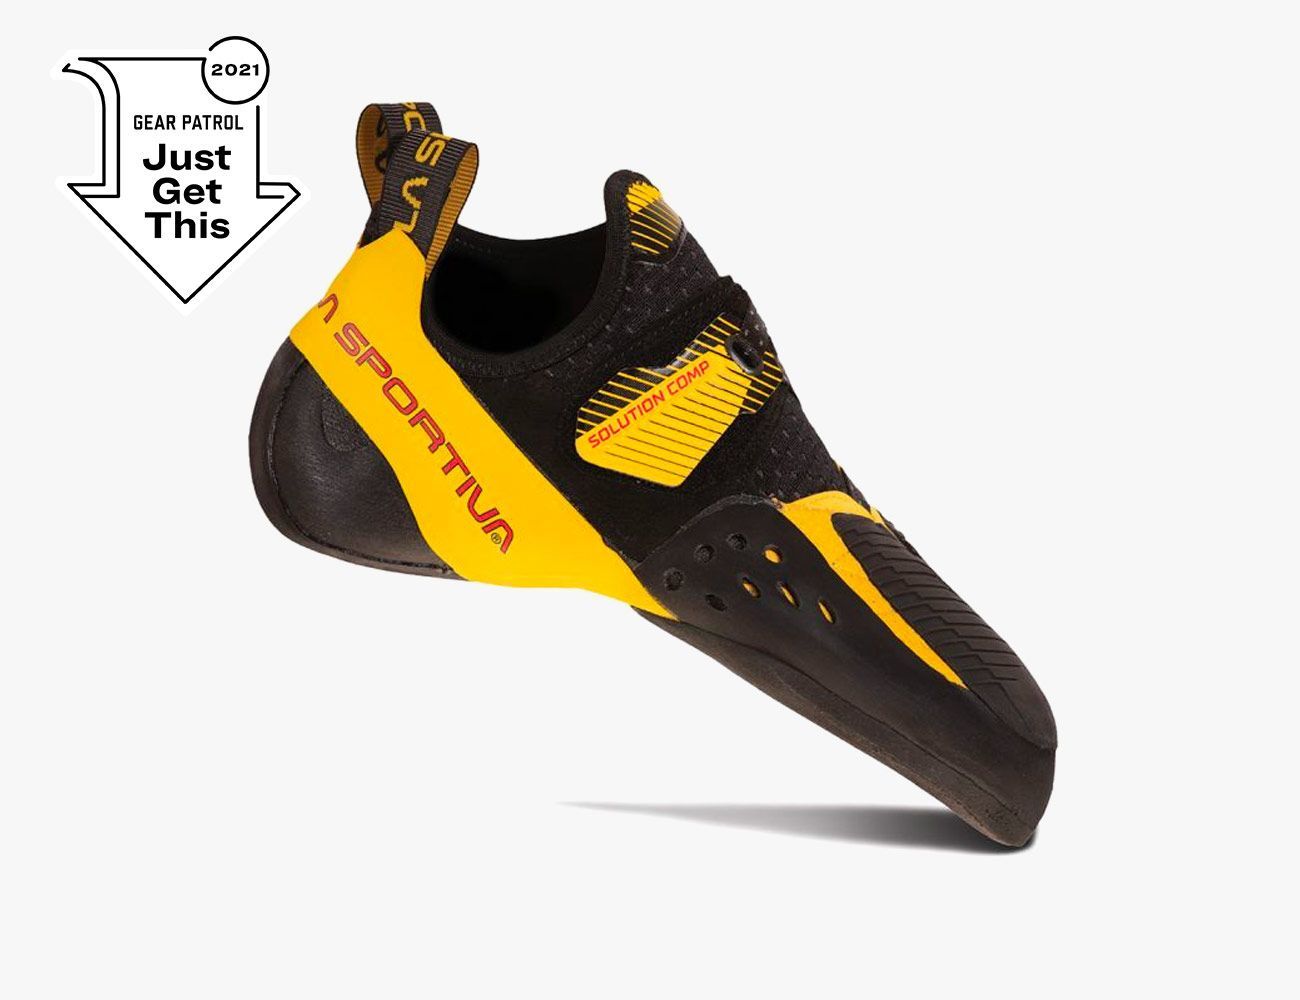 GARRA Climbing Shoes Kokoro with lace-up Closure & Vibram Sole for Optimal fit and Precision 